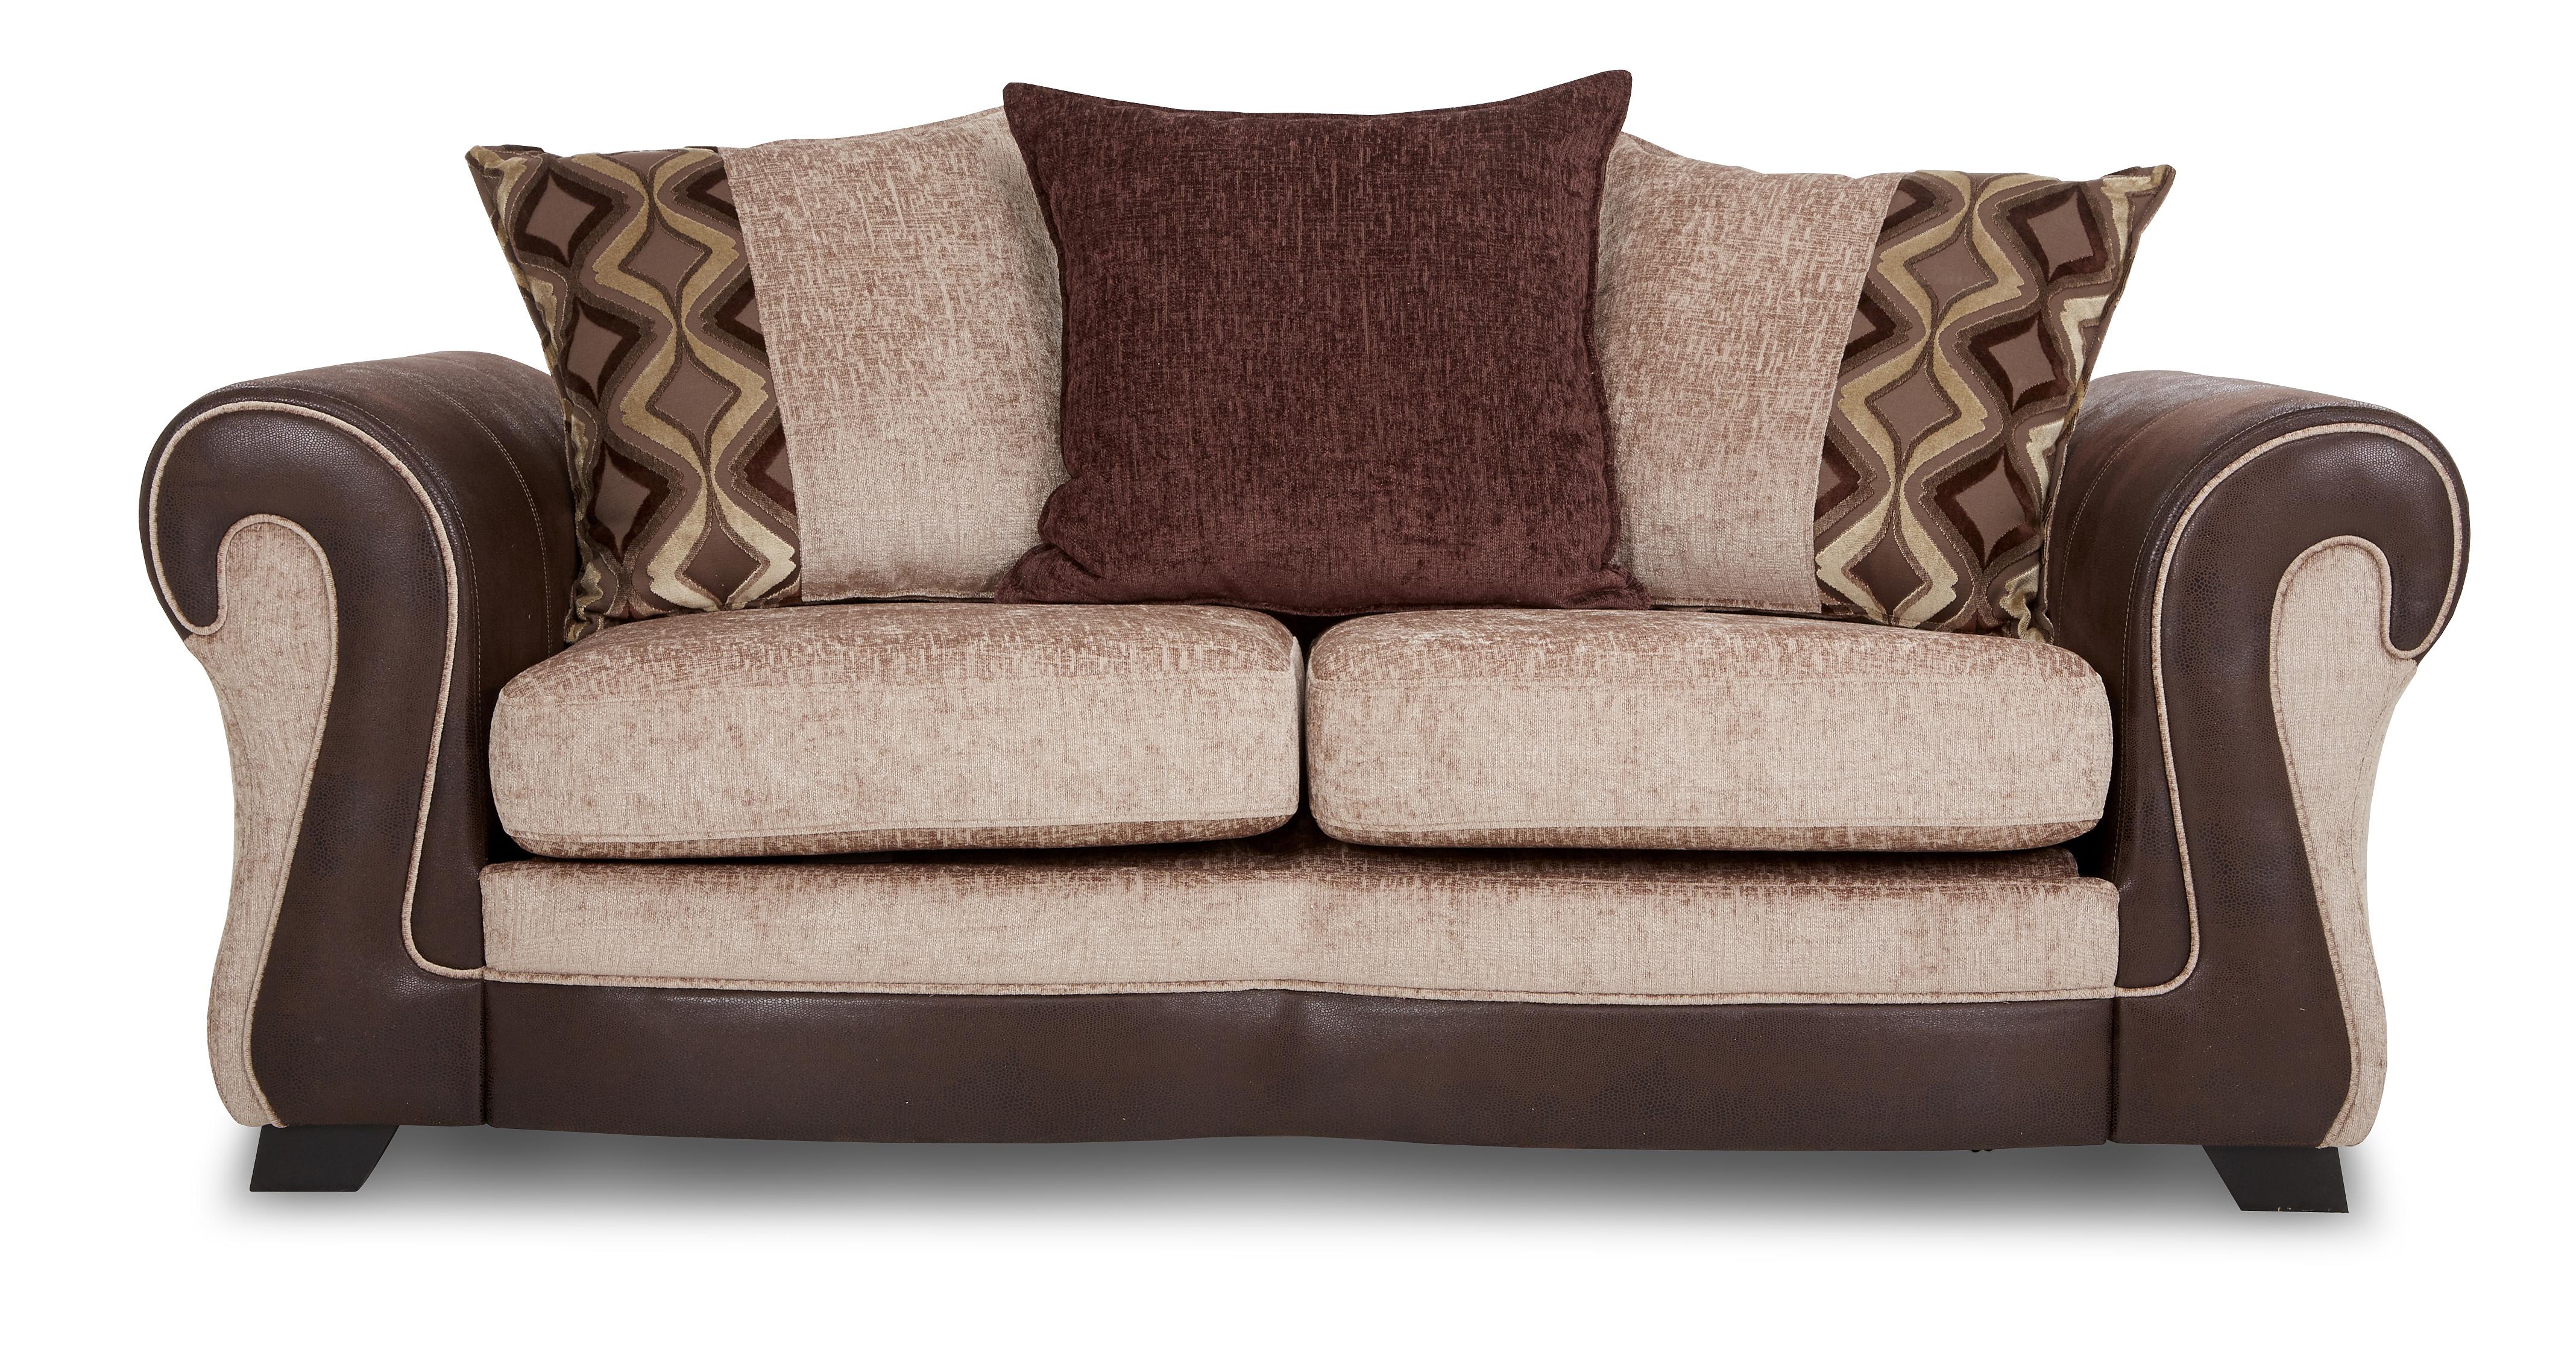 Belle : Large 2 Seater Pillow Back Sofa